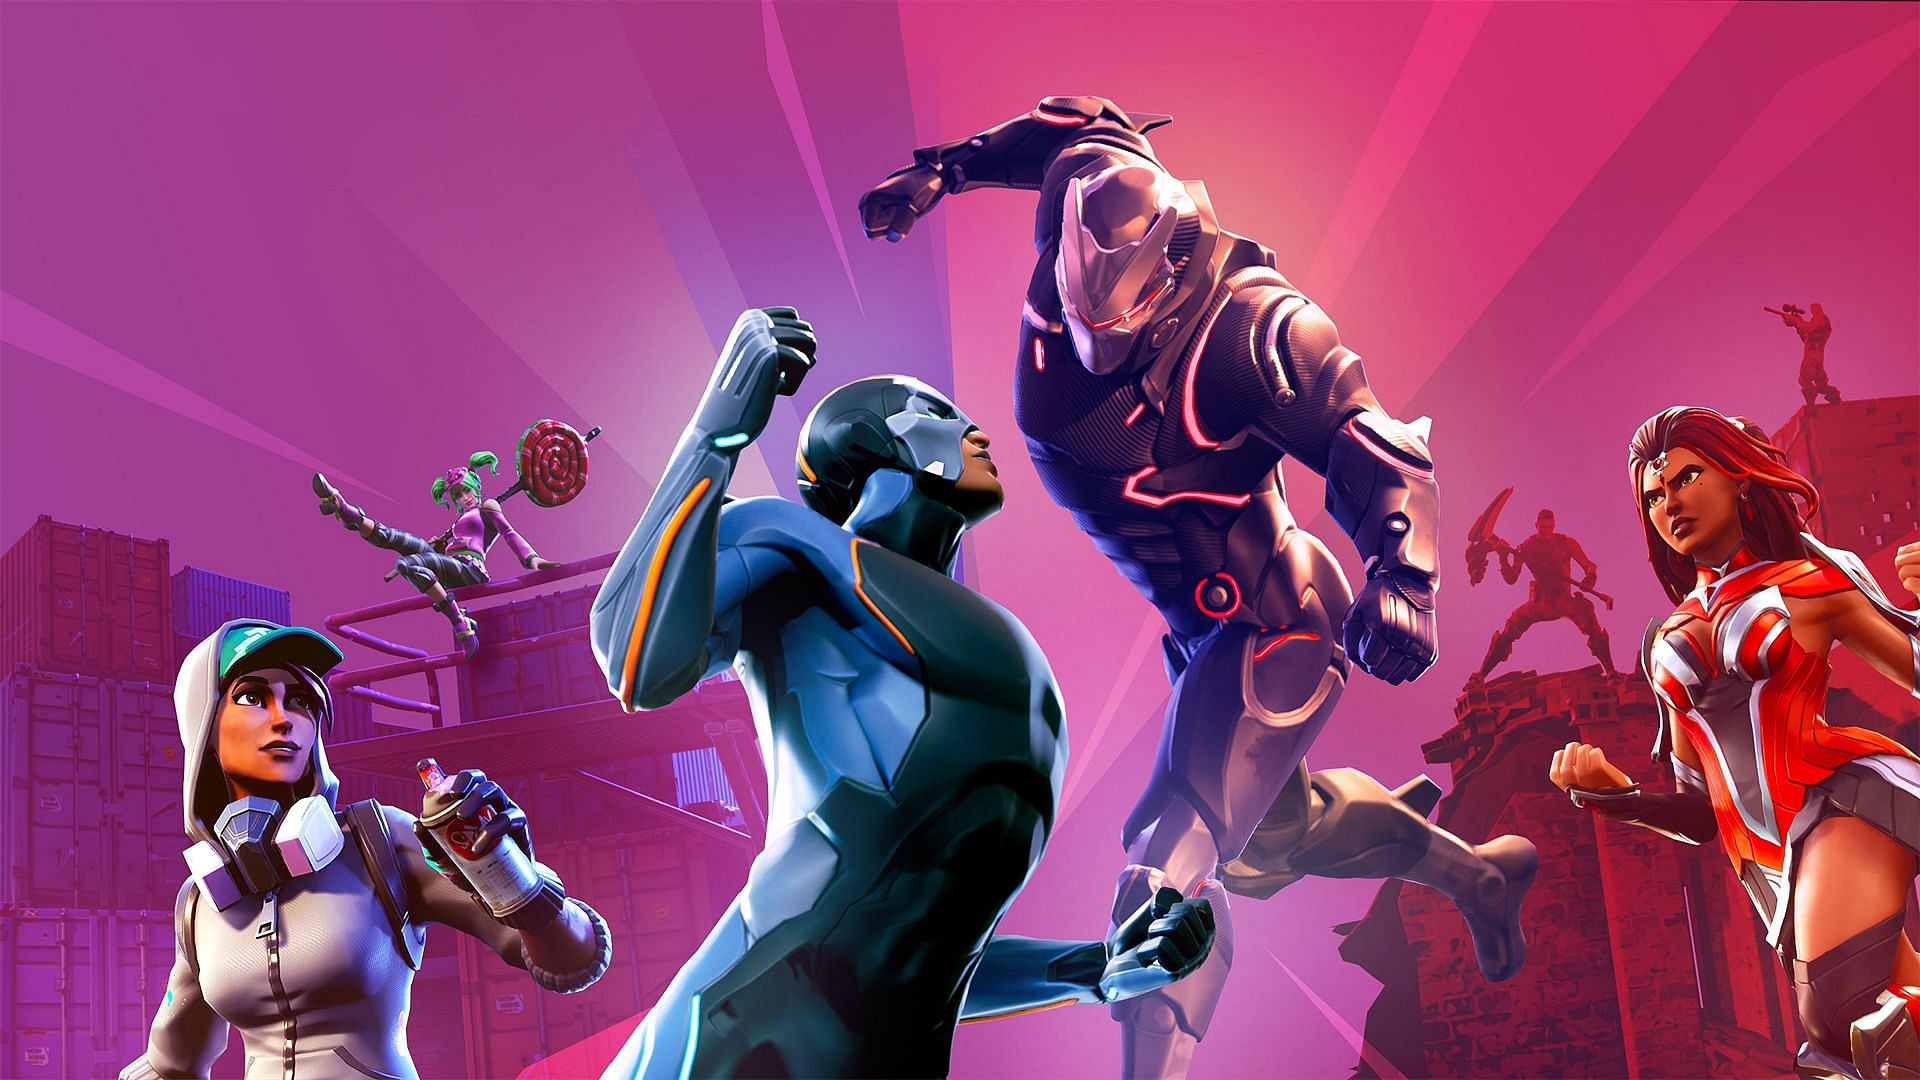 There are many improvements Epic Games could add to the Fortnite Battle Pass (Image via Epic Games)